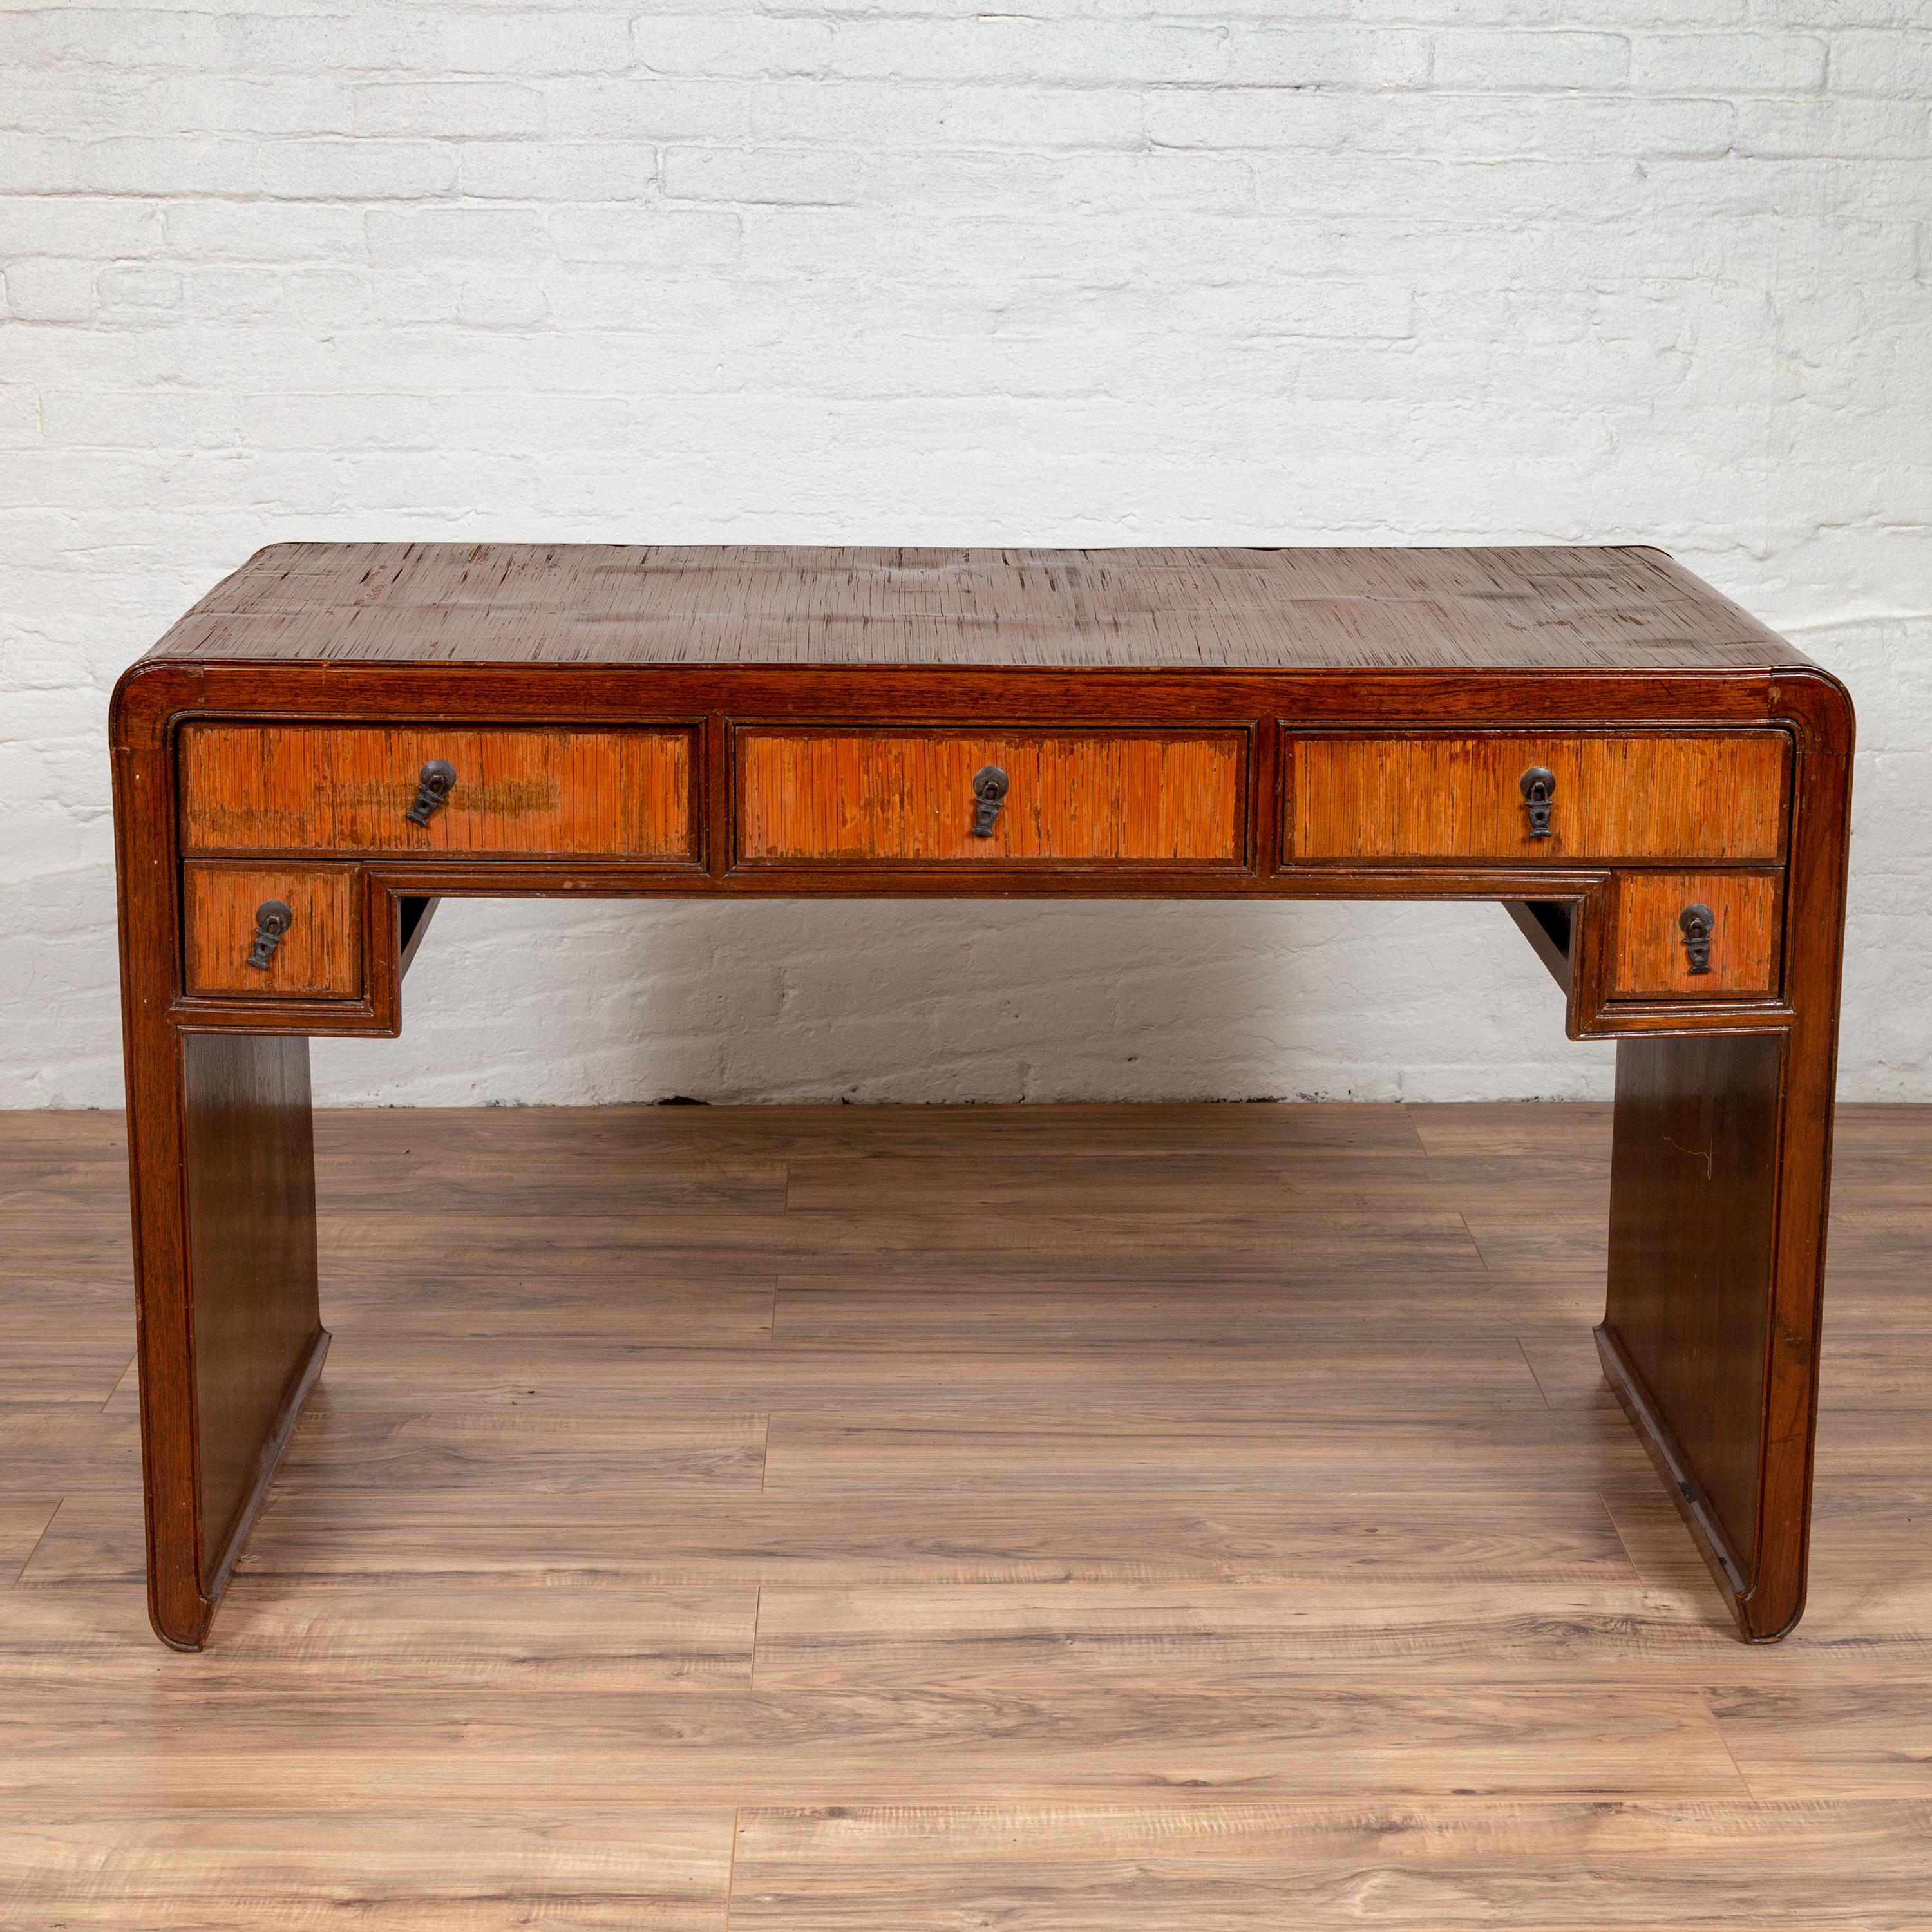 A vintage handmade desk found in Northern Thailand with five drawers and opium mat top. Born in Thailand during the midcentury period, this handmade desk features an opium mat top, flowing delicately into the sides accented with scrolling